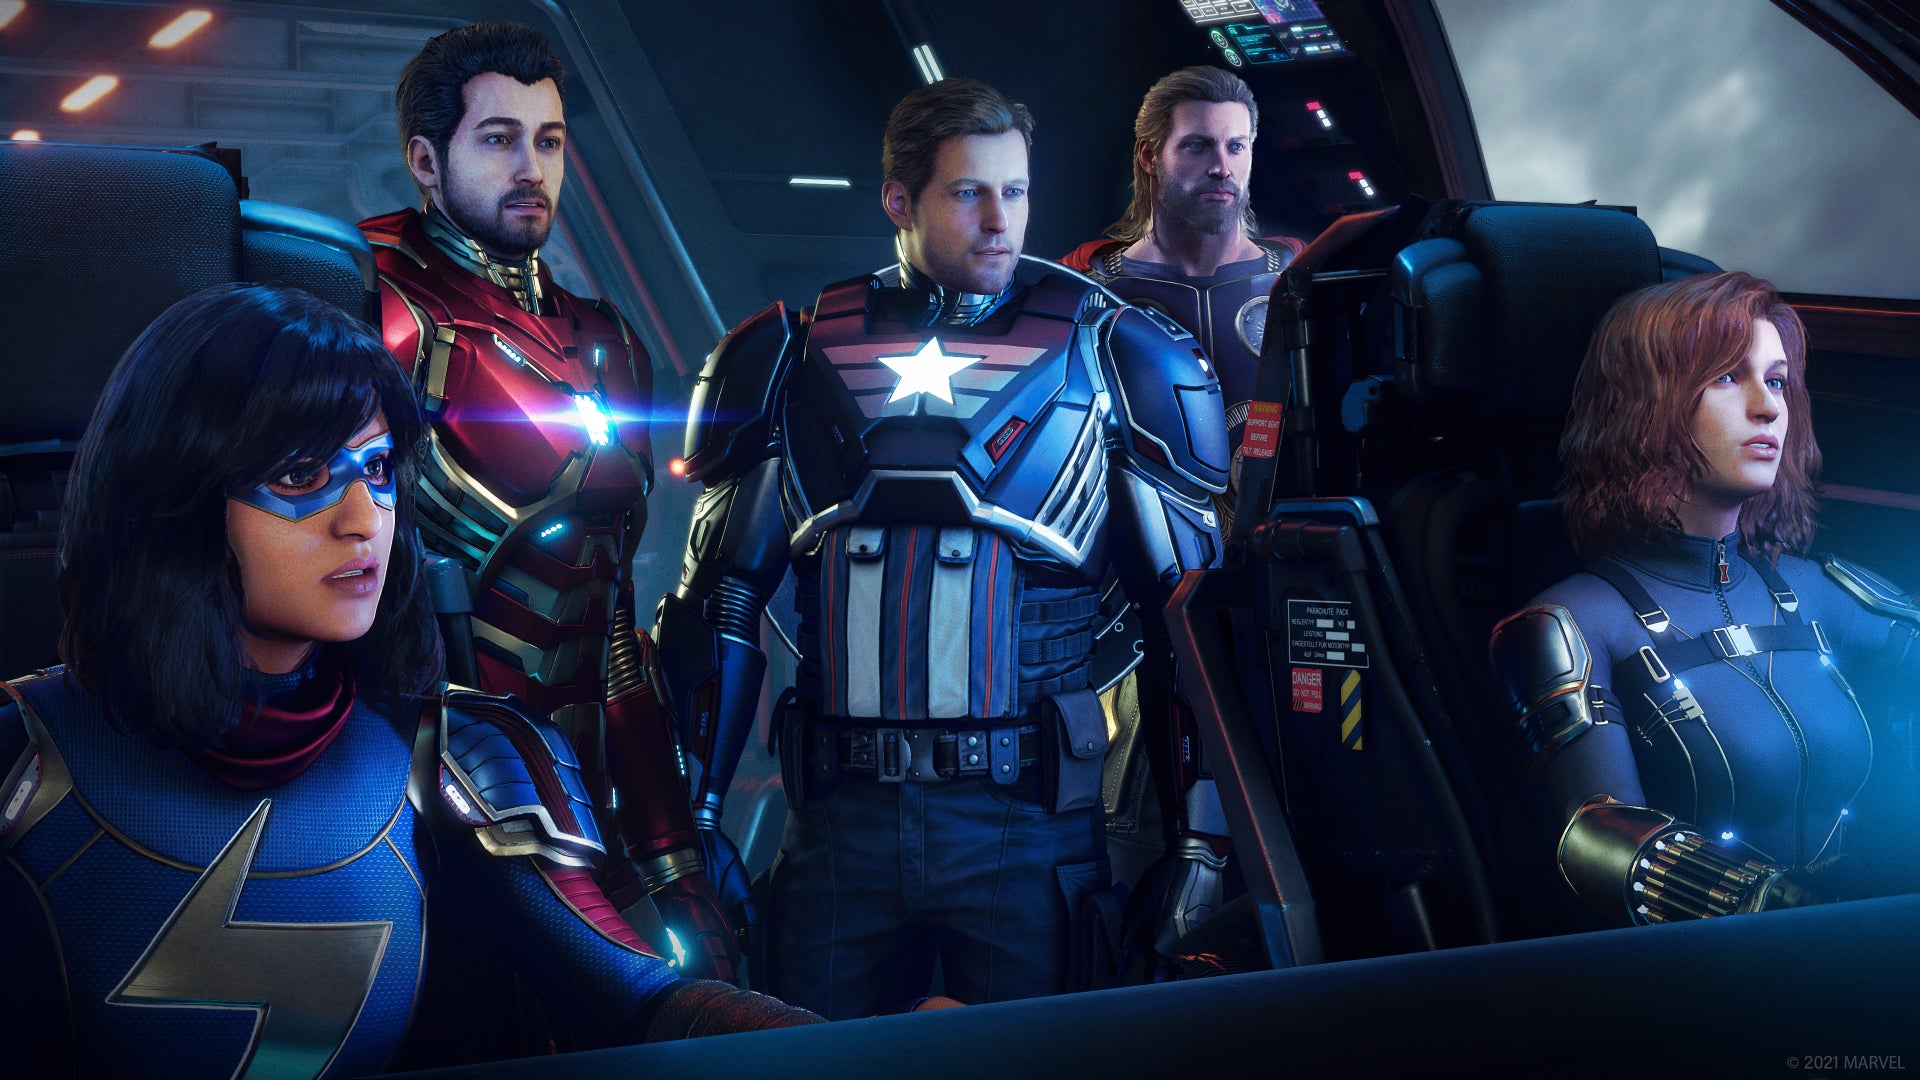 Image for Marvel’s Avengers is breaking promises and angering fans with paid boosts - but what really matters is balance